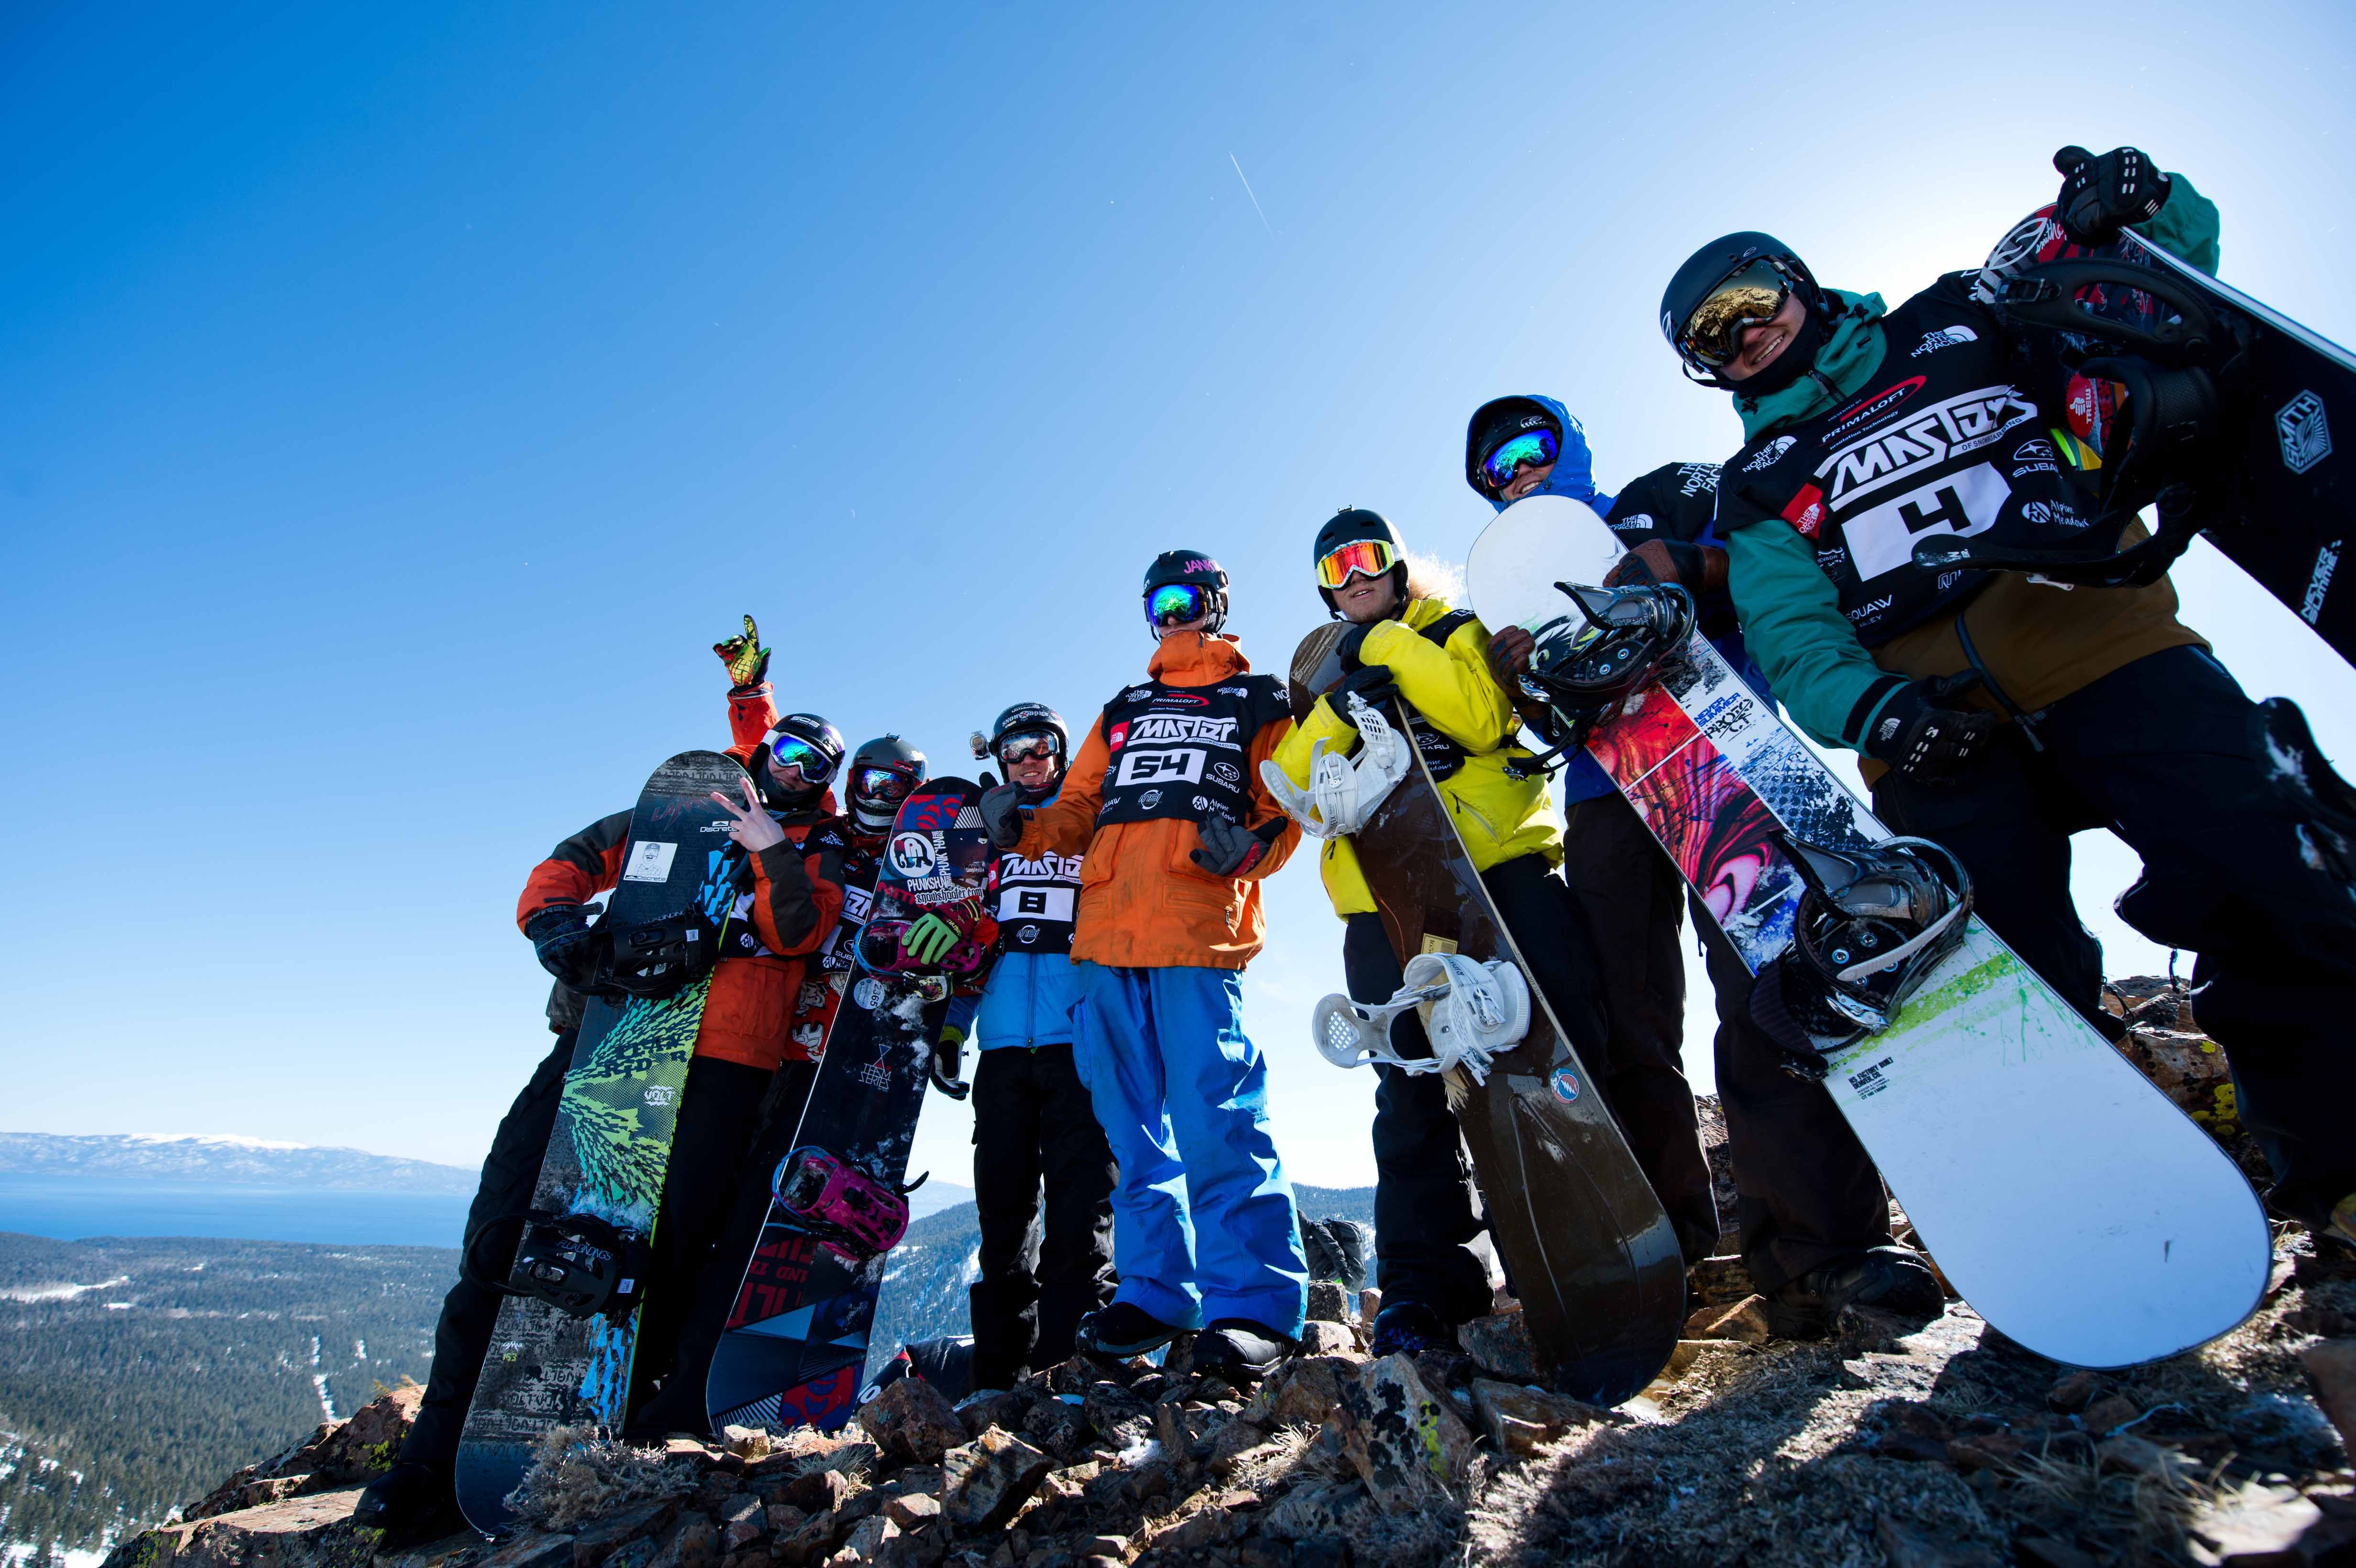 TNF Masters of snowboarding event at Alpine Meadows